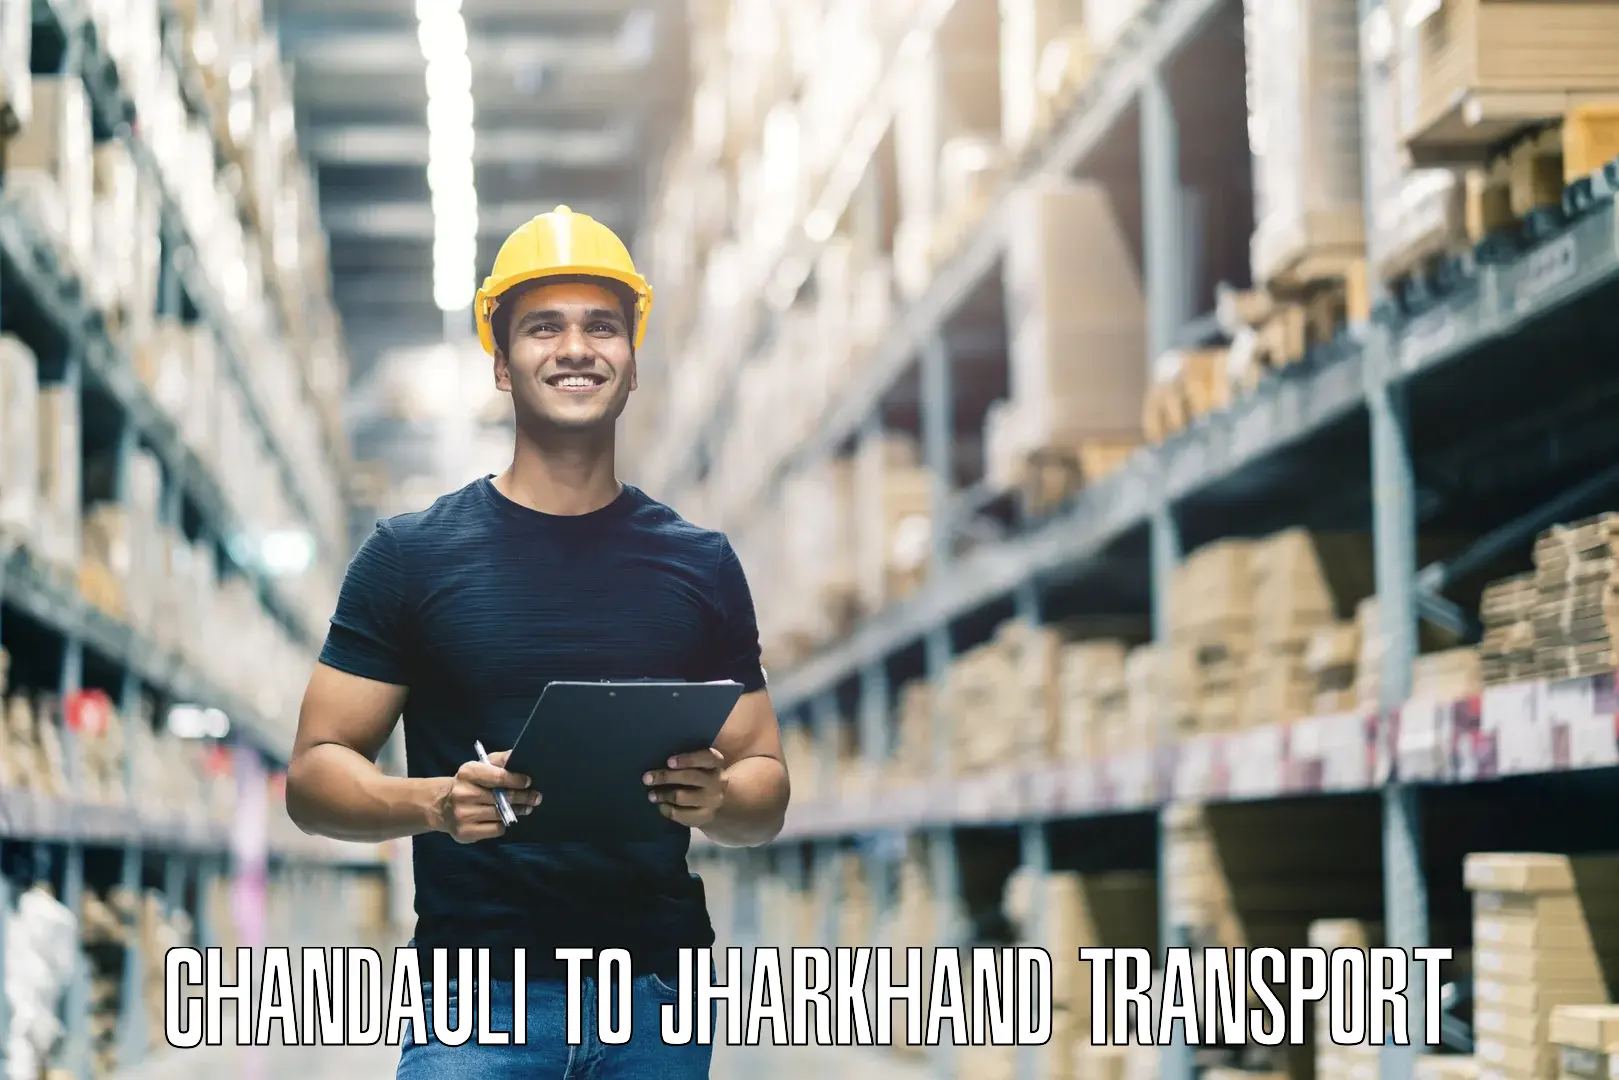 Shipping services in Chandauli to Isri